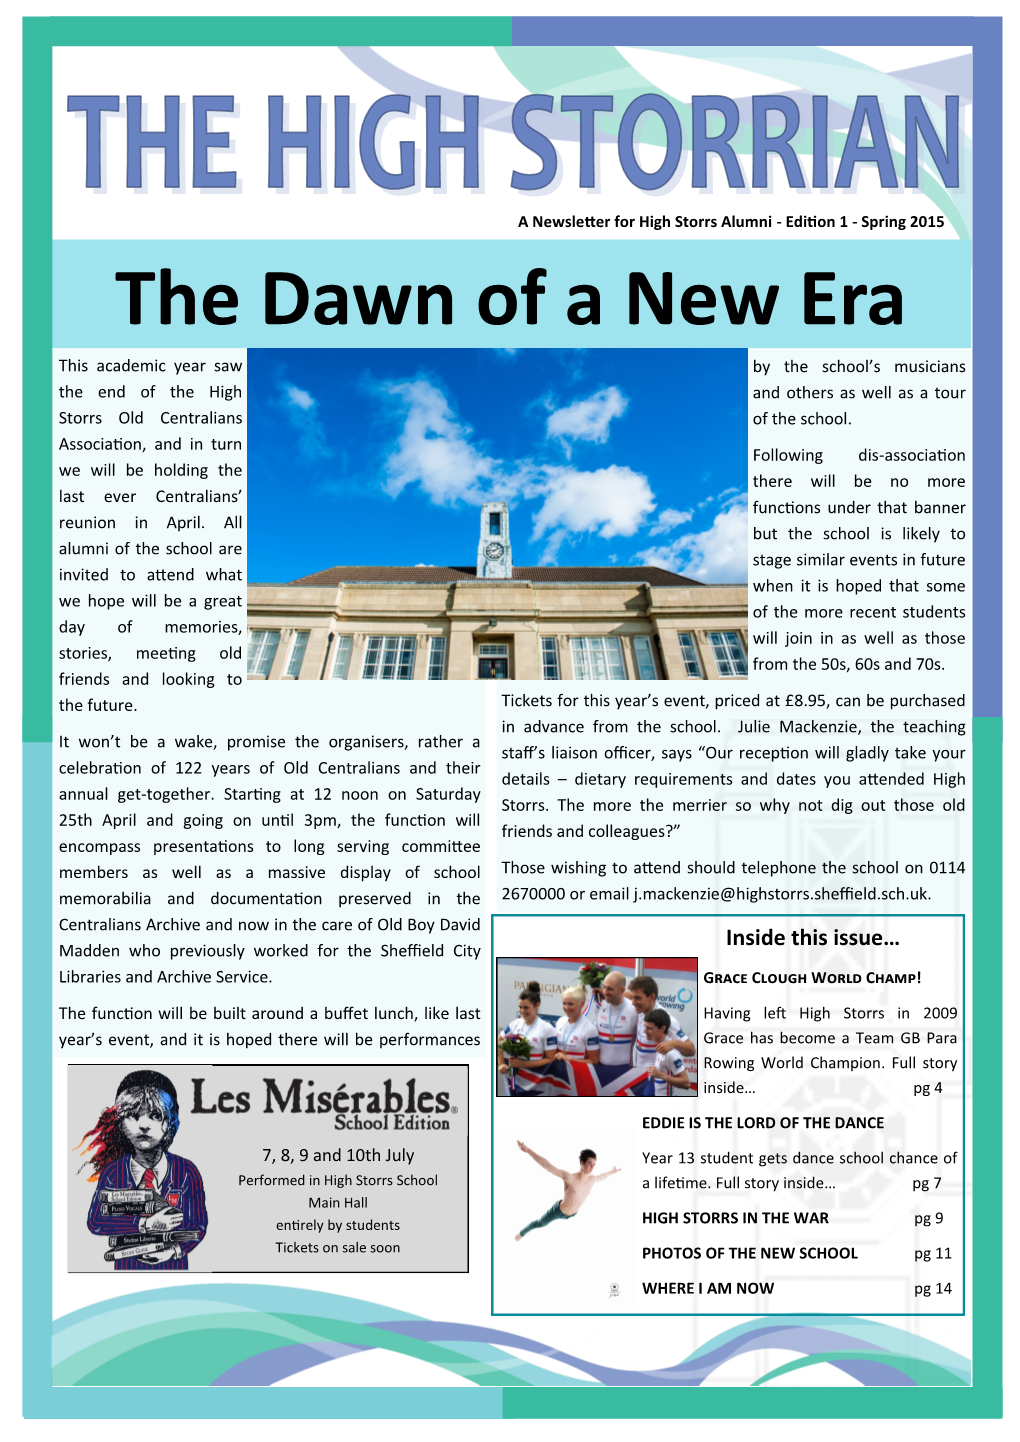 The Dawn of a New Era This Academic Year Saw by the School’S Musicians the End of the High and Others As Well As a Tour Storrs Old Centralians of the School